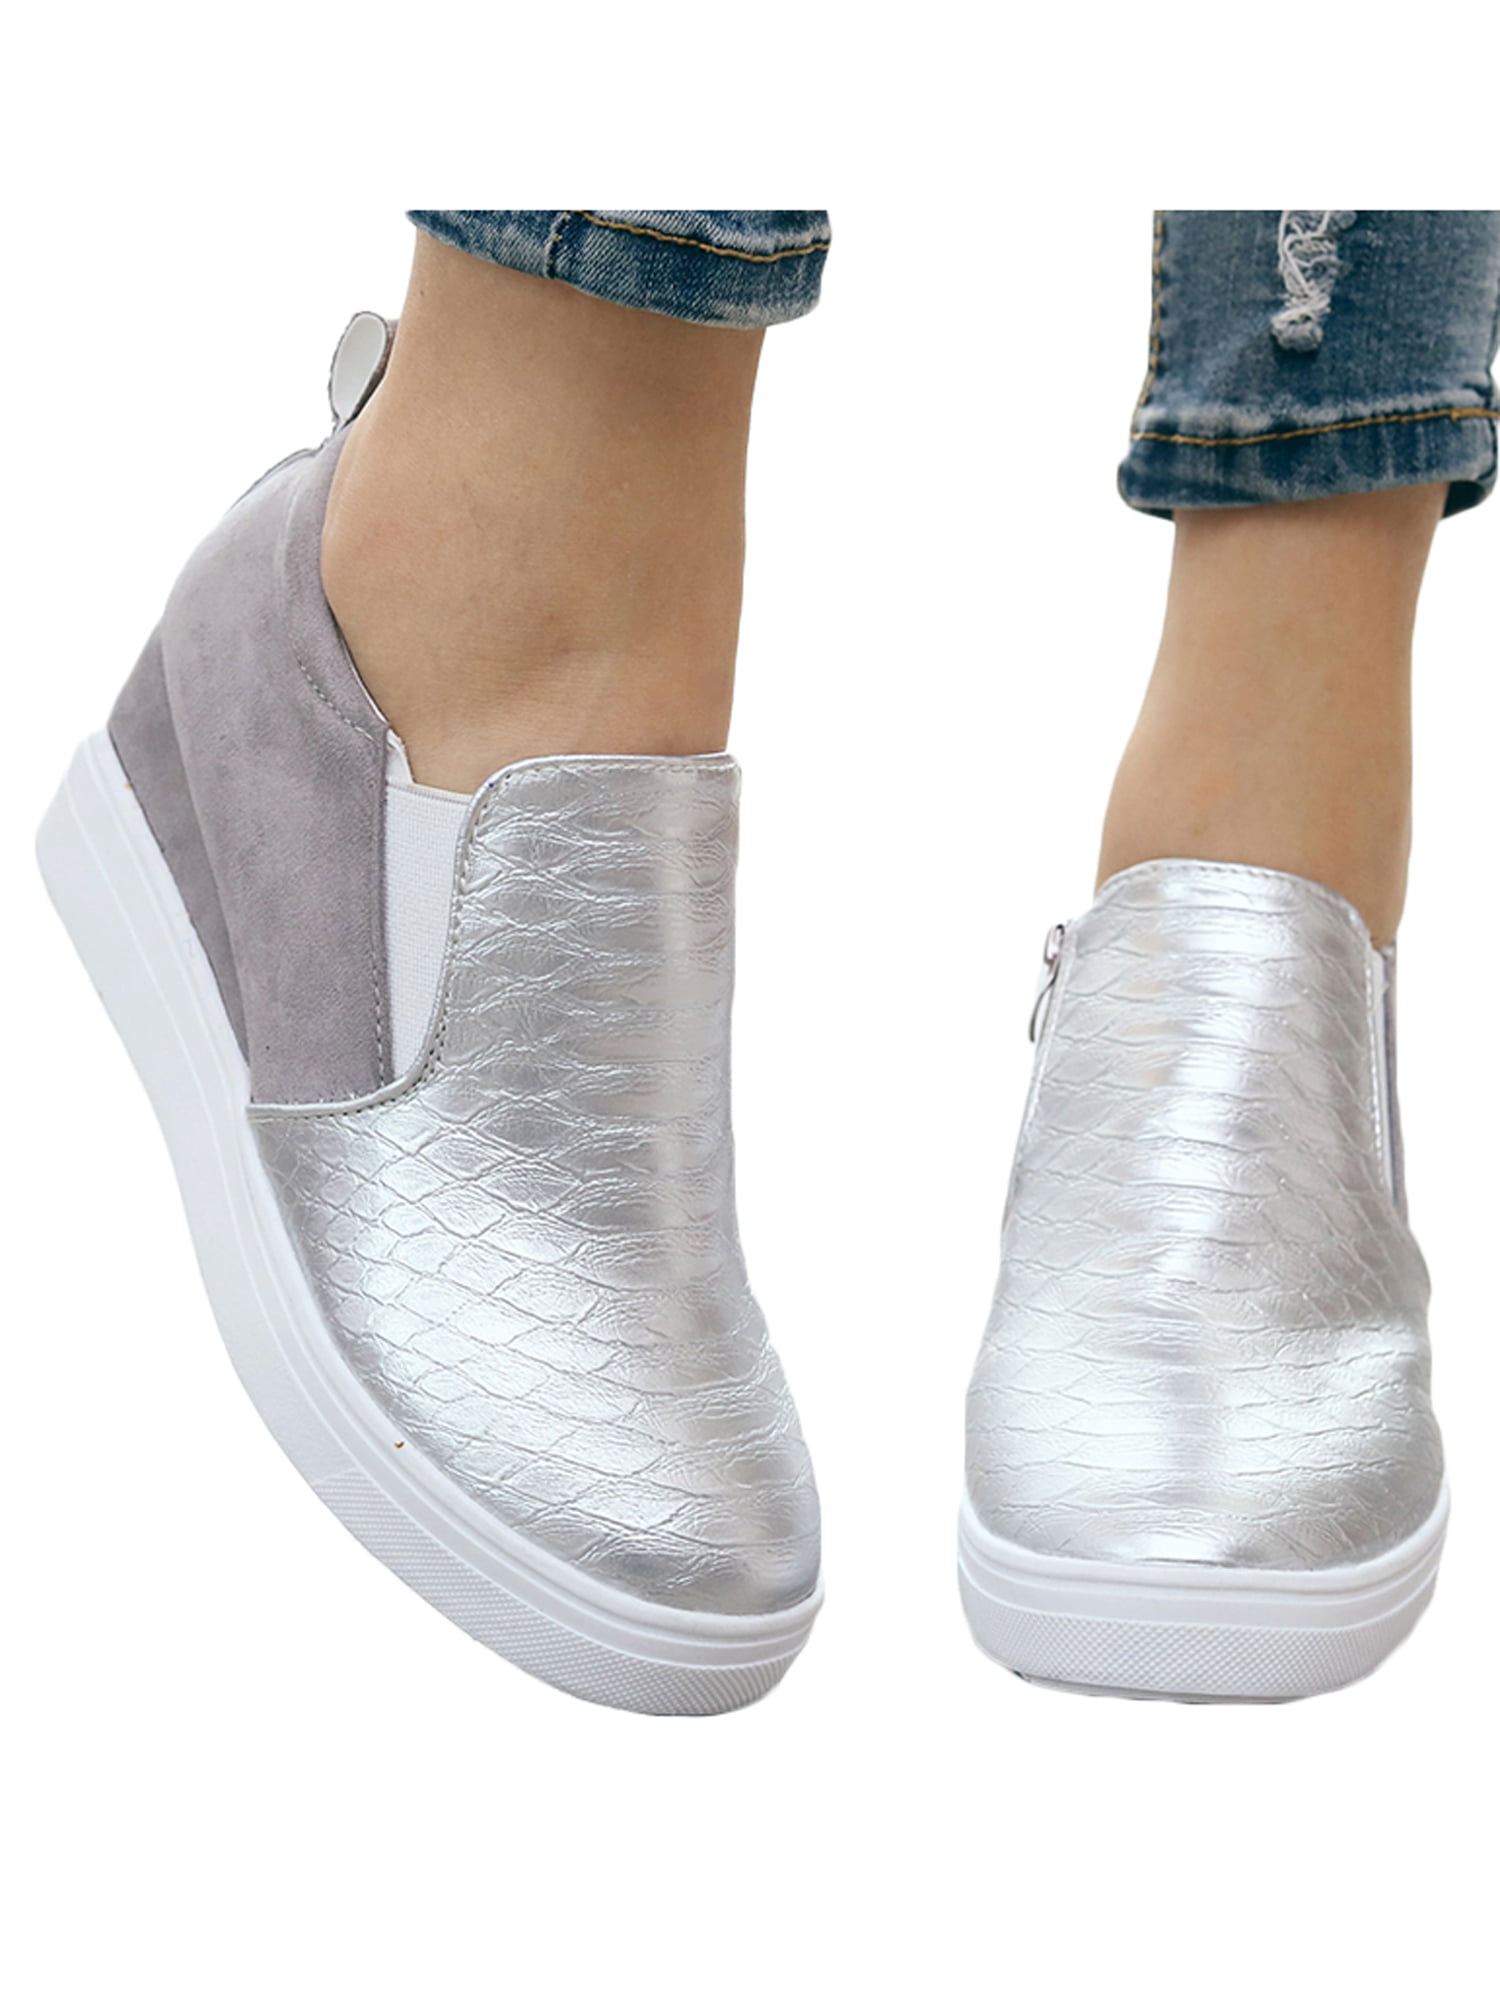 slip on trainer shoes